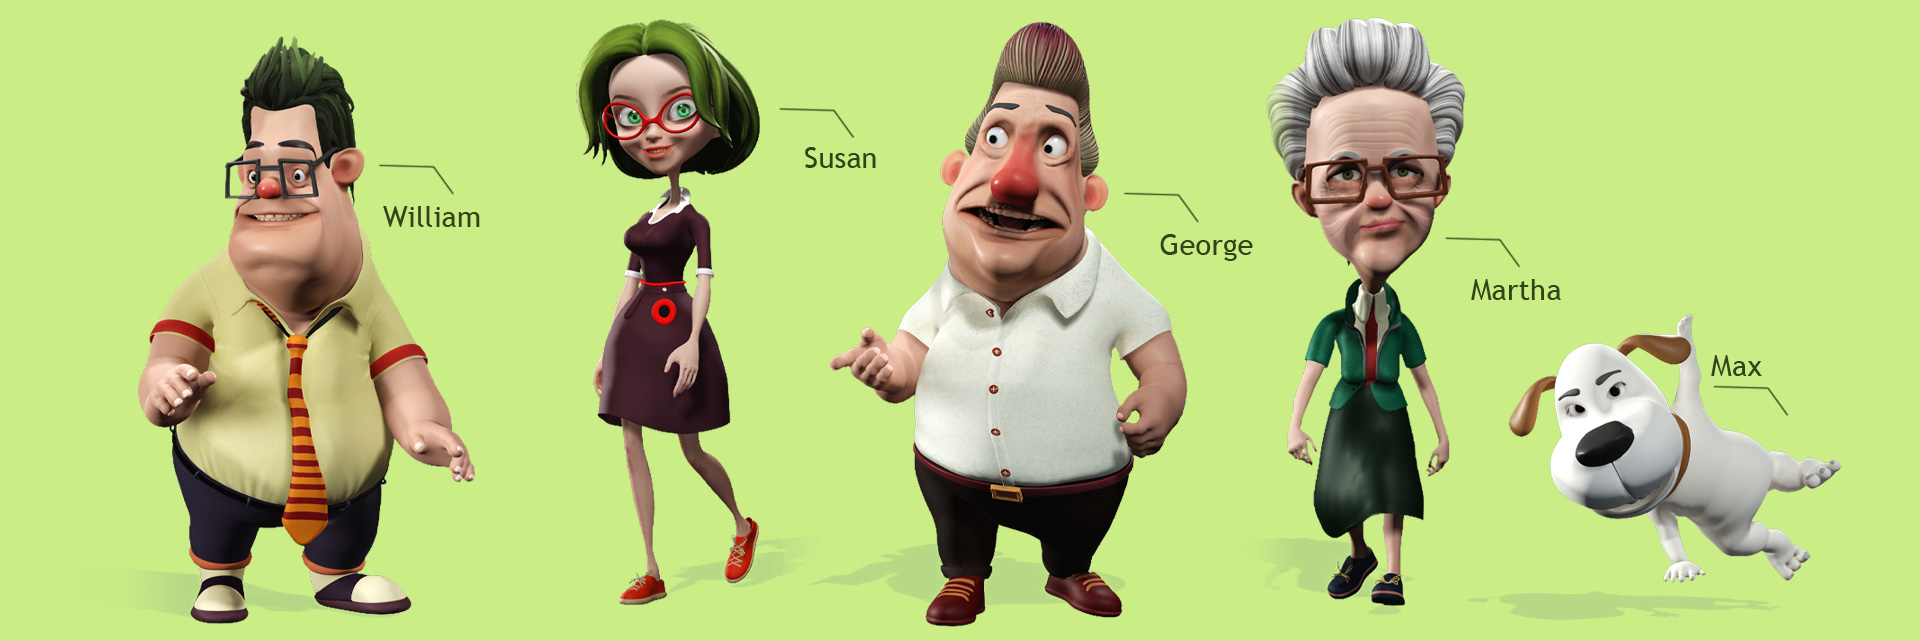 cartoon character-body shapes in clothes